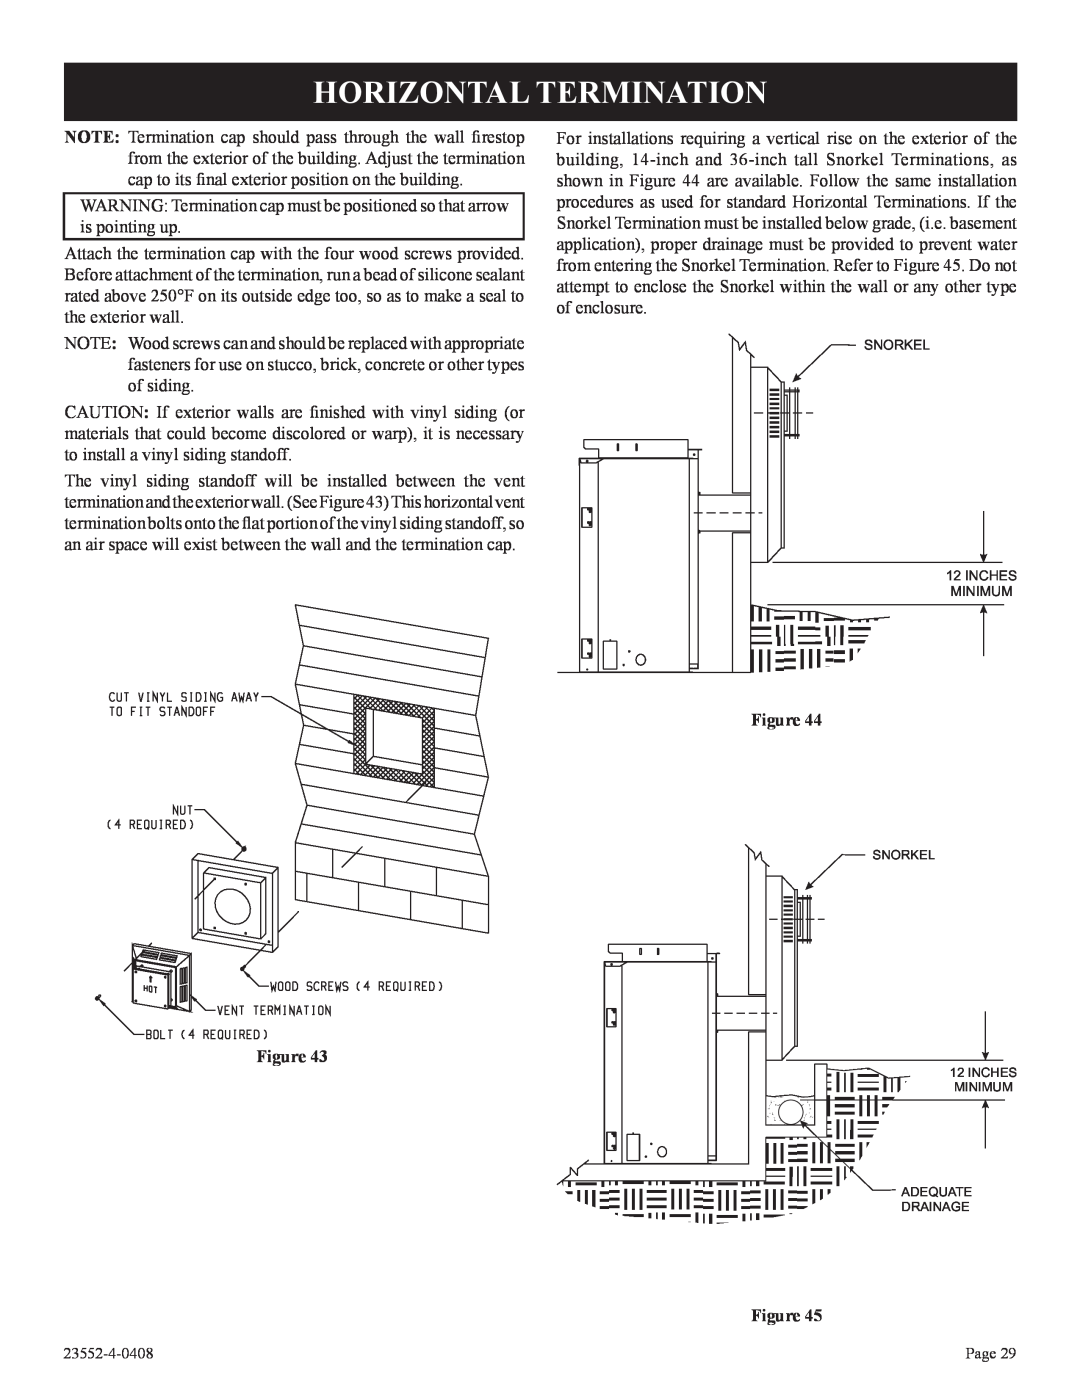 Empire Comfort Systems 1, DVD32FP3, 3)(N installation instructions Horizontal Termination, 23552-4-0408, Page 